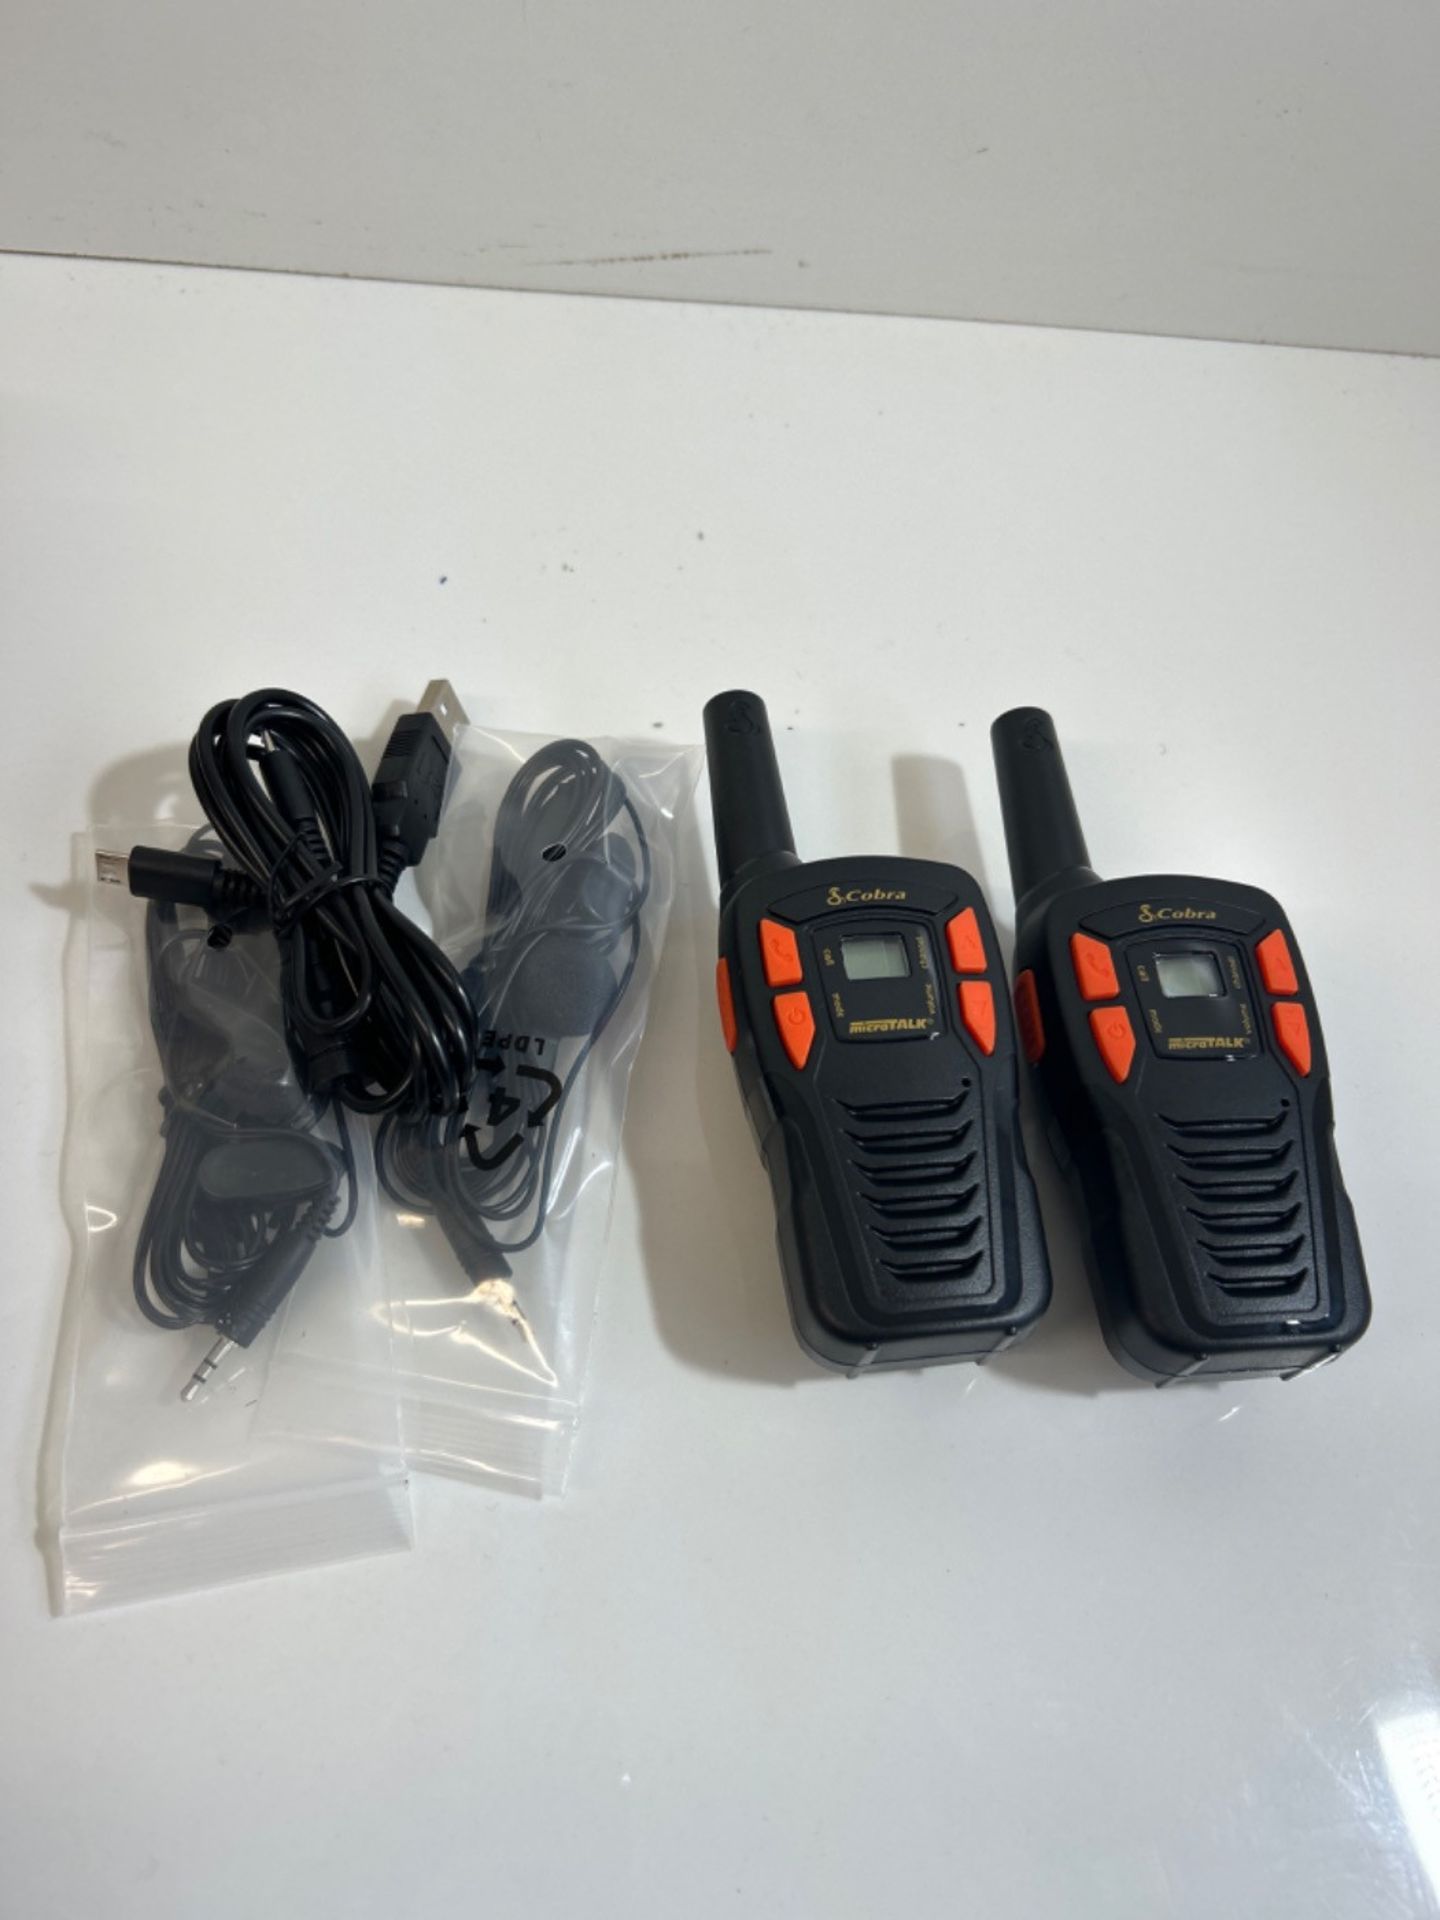 Cobra AM245 BBX Walkie Talkie - Weather Resistant With GA-EBM2 Earbud Microphone and Rechargeable... - Bild 3 aus 3